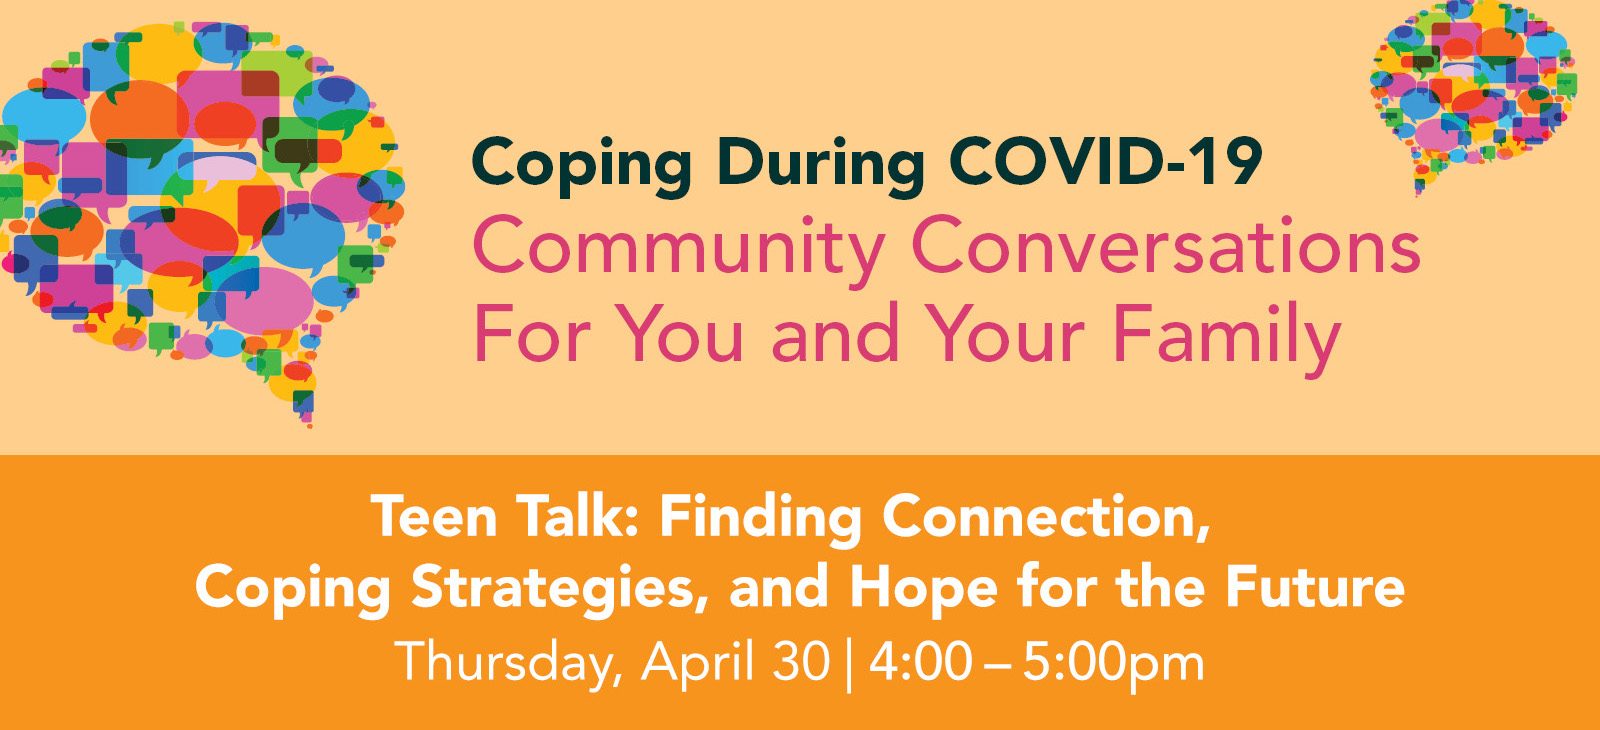 Teen Talk: Finding Connection, Coping Strategies, and Hope for the Future graphic